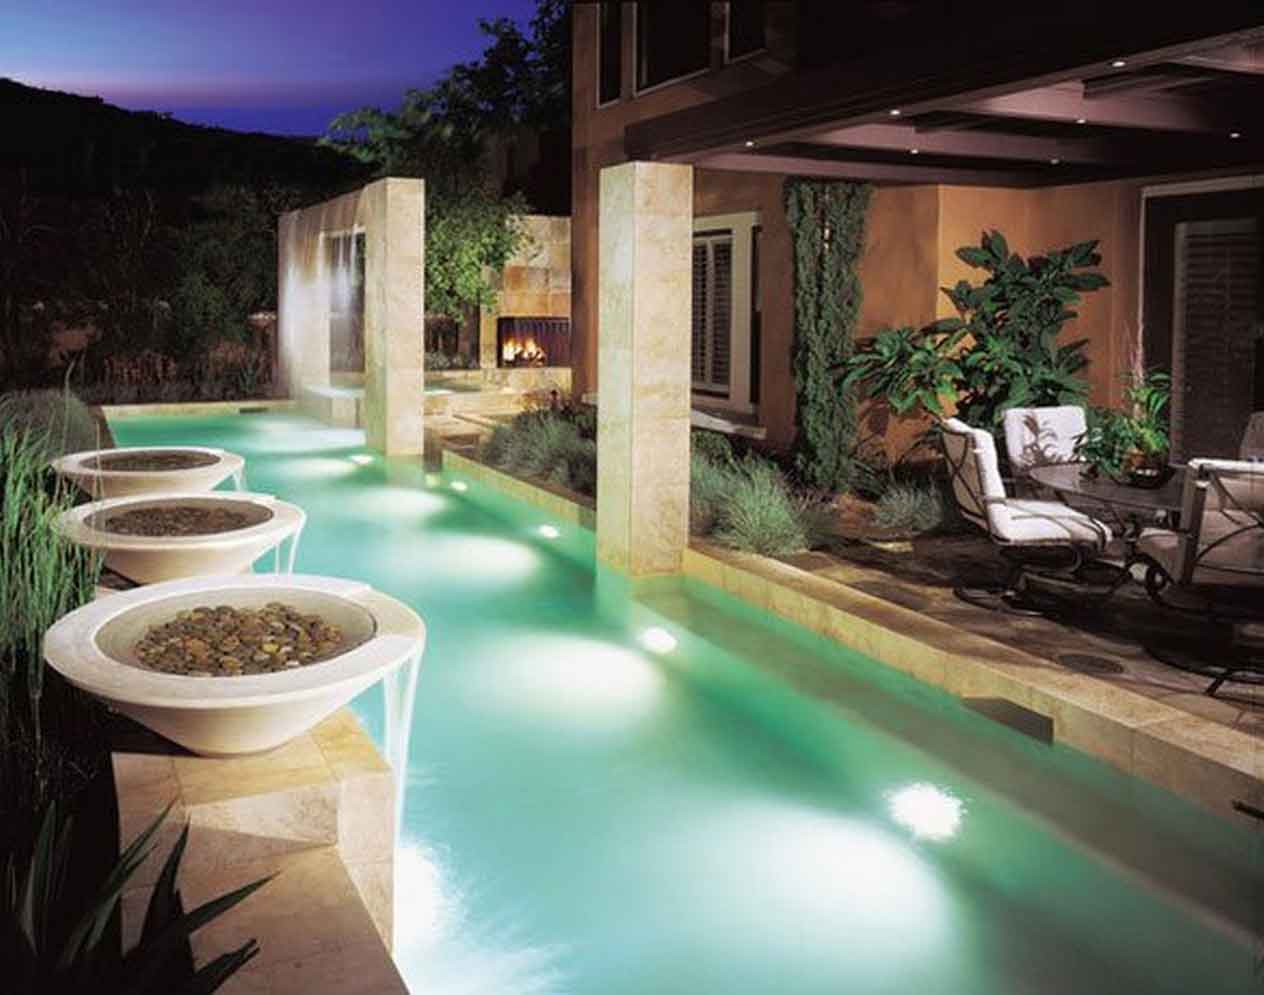 7 Unbelievable Facts About Inground Pool Fountains | Roy Home Design